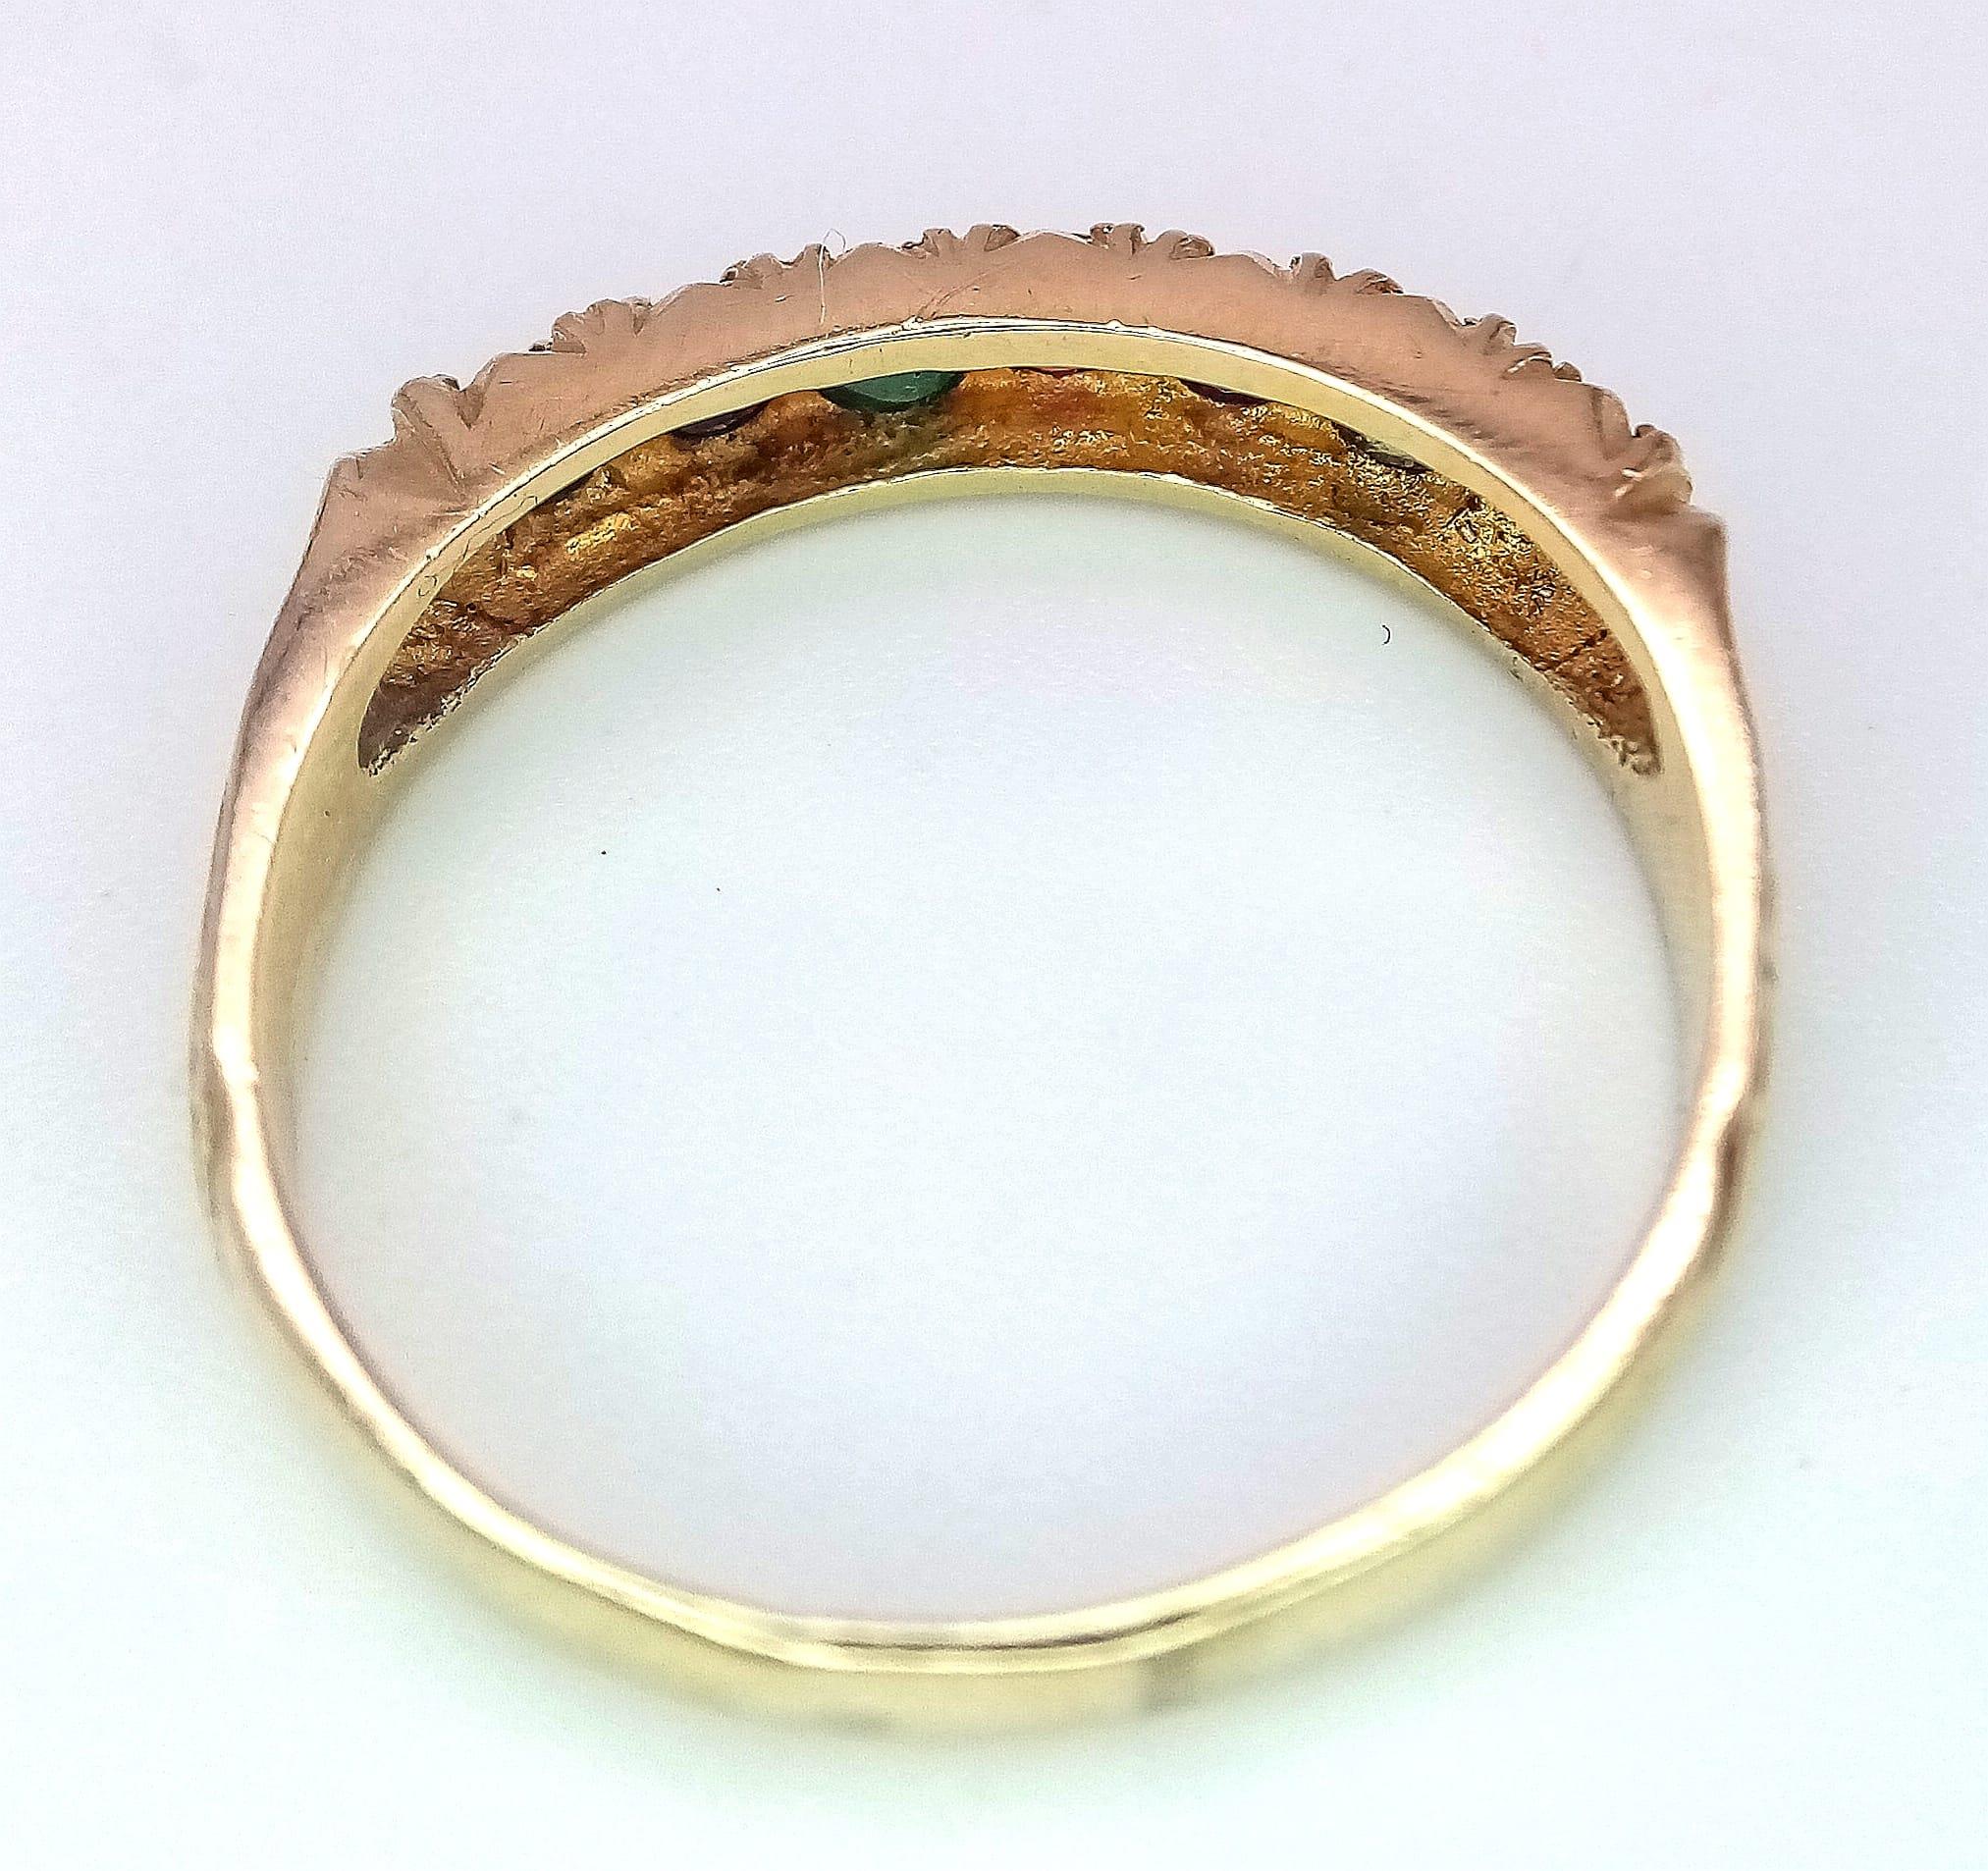 A PRETTY 9K YELLOW GOLD MULTI GEMSTONES SET DEAREST RING, WEIGHT 2.9G SIZE S - Image 9 of 11